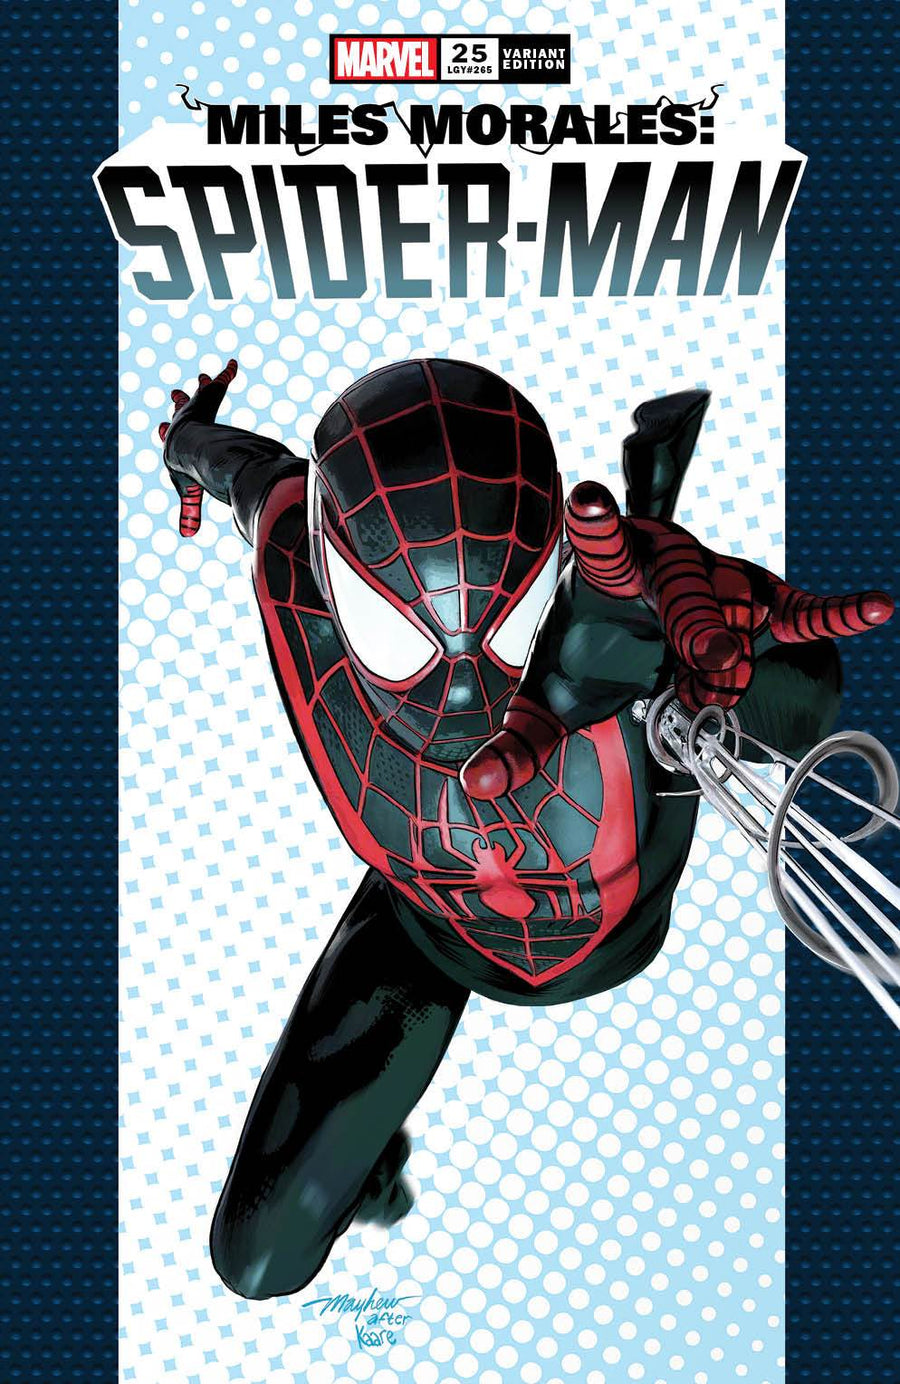 MILES MORALES: SPIDER-MAN #25 KRS COMICS Variant Cover Set with Trade Dress and Virgin Raw